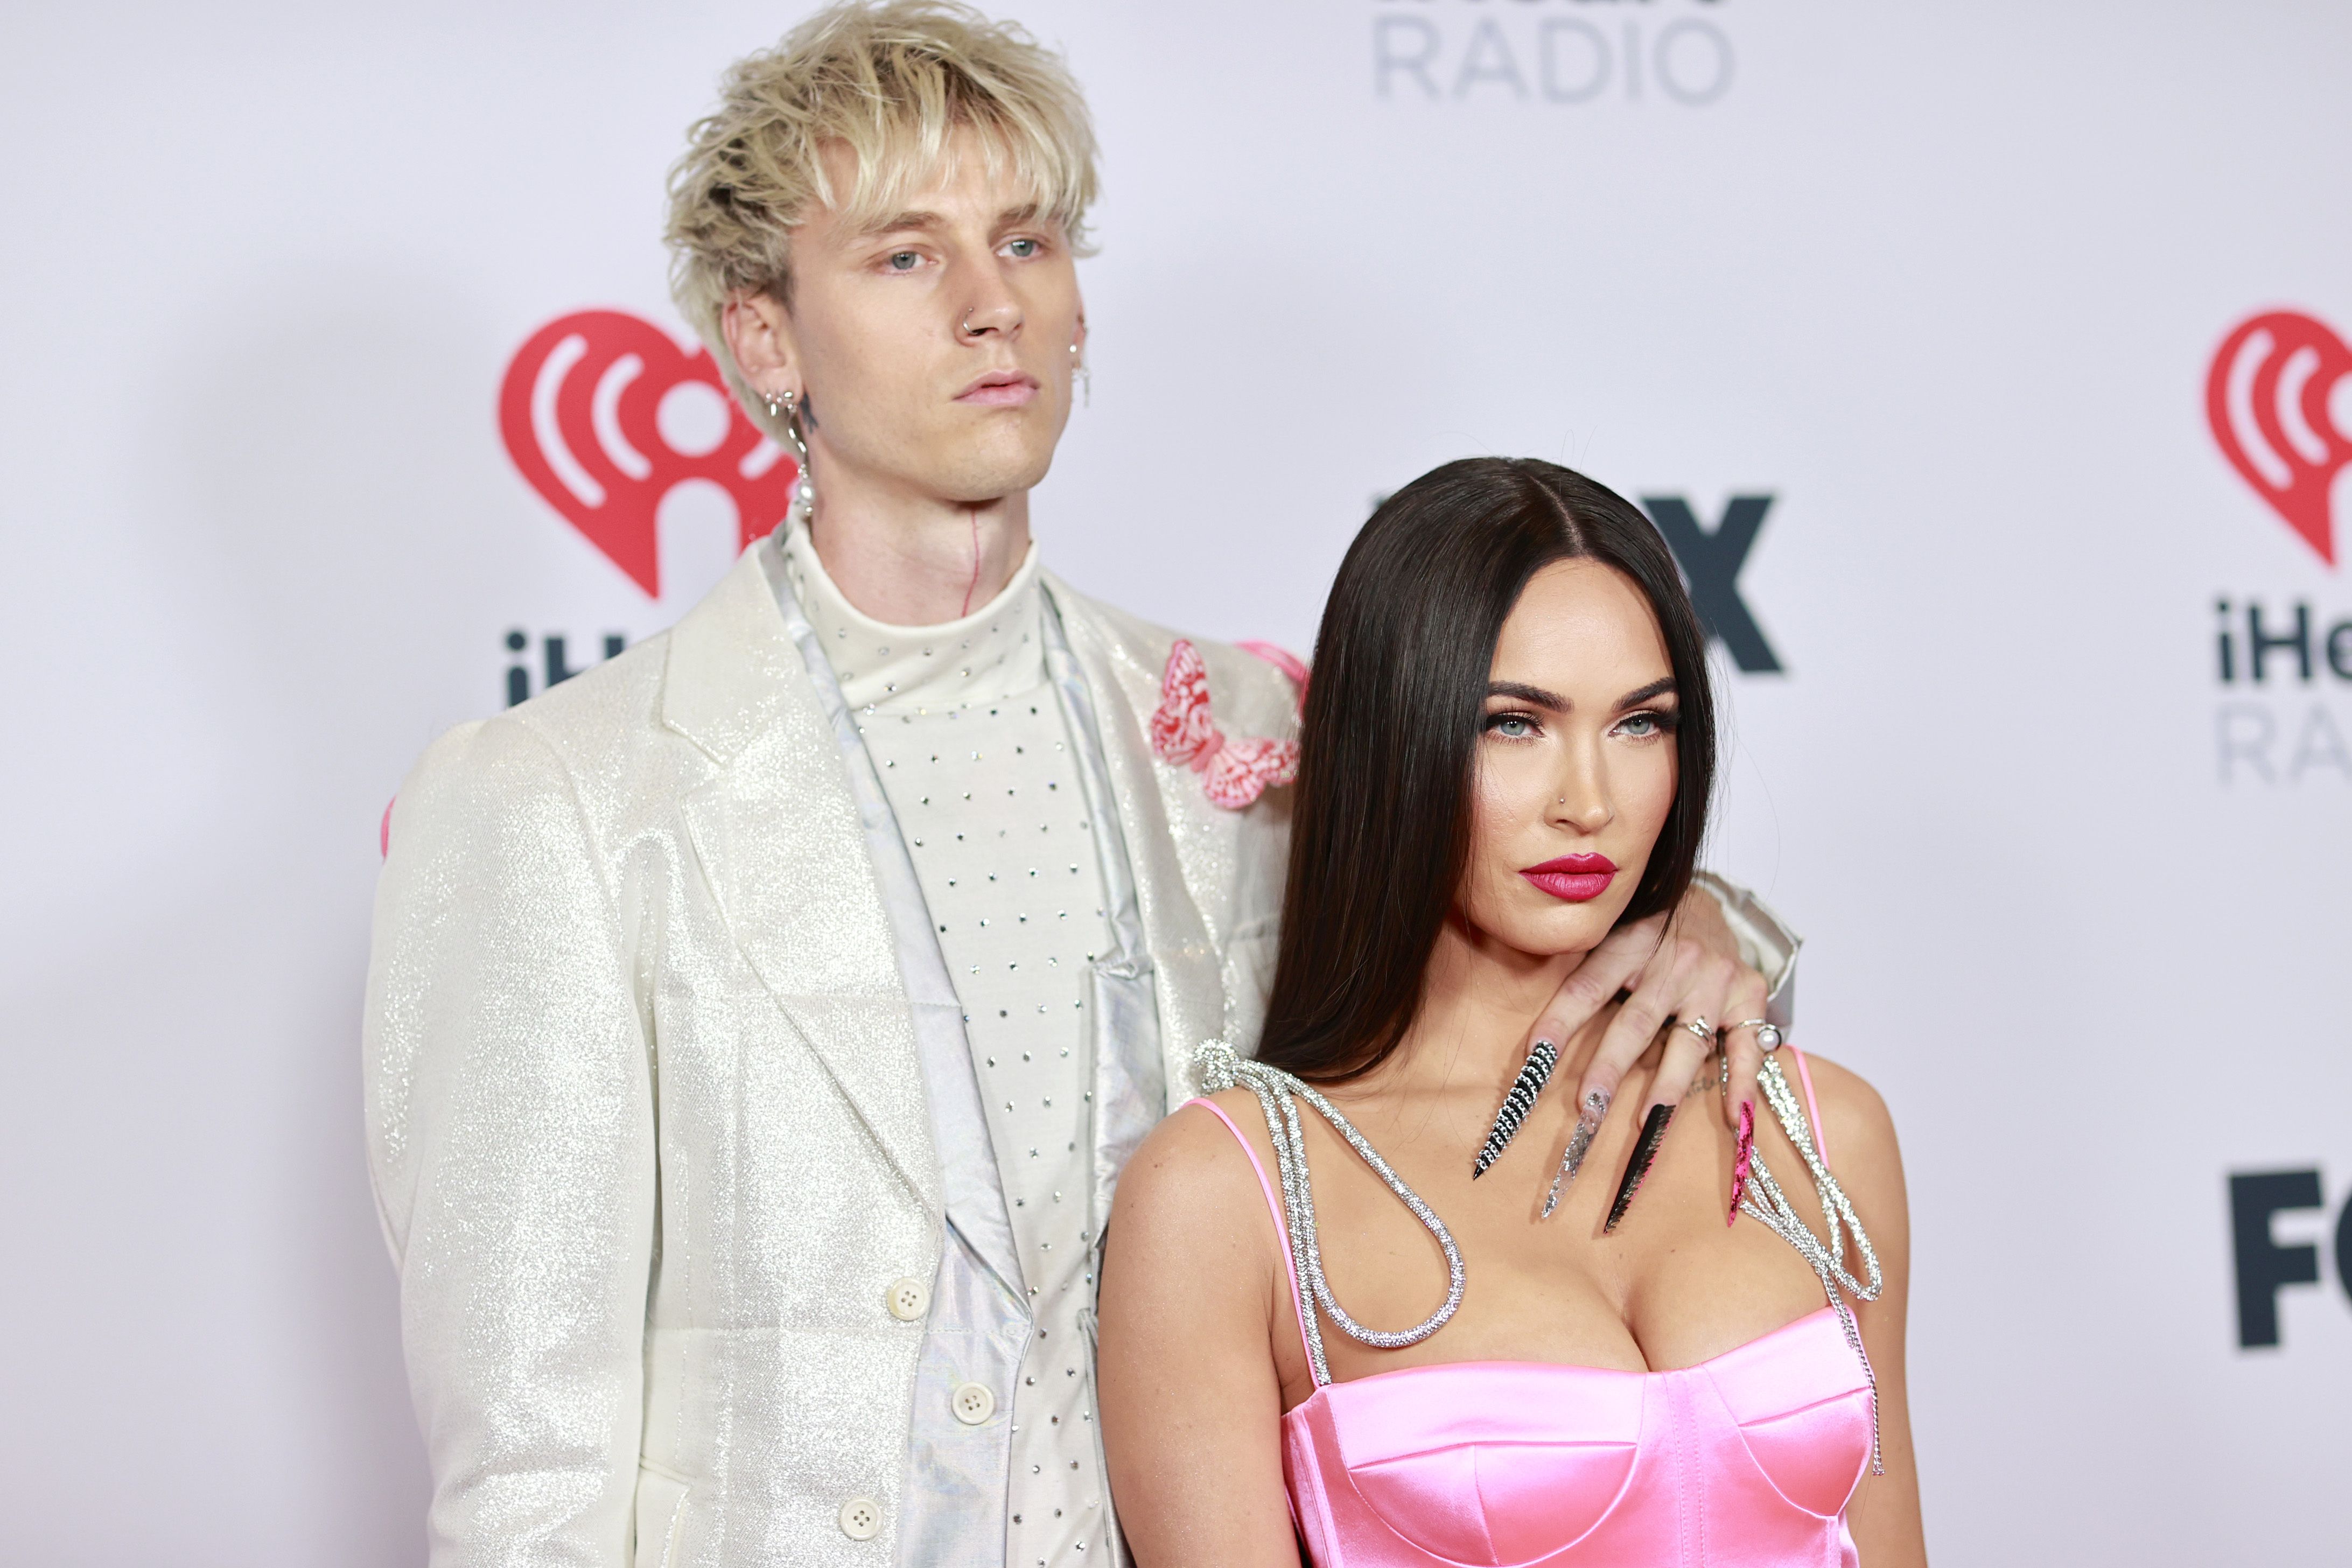 Megan Fox Is Happy With New Ink Dedicated To Machine Gun Kelly   Hollywood Life